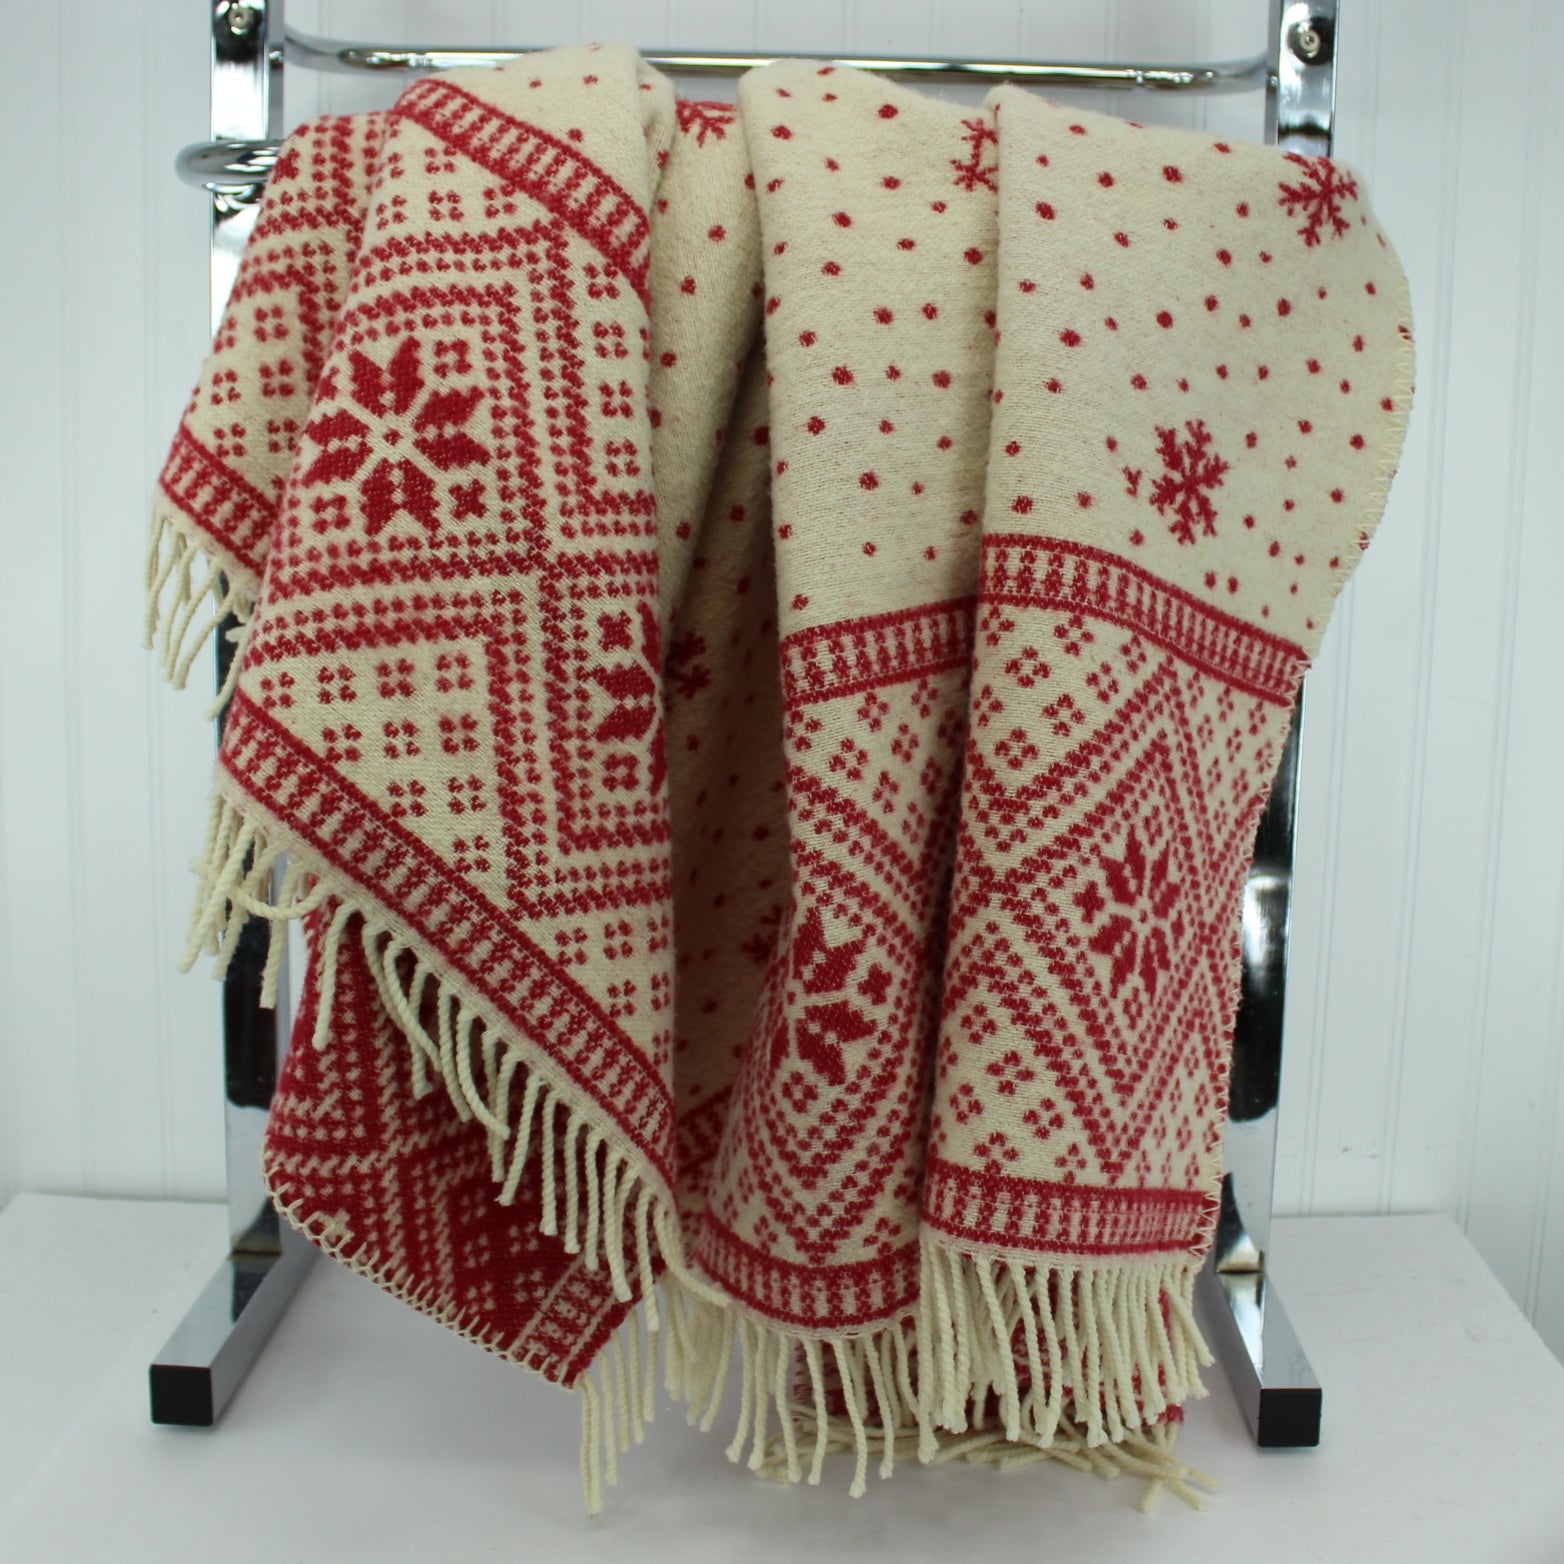 Coming Home Wool Throw Holiday Winter Snowflake Design Red White 2 Available reverses to creamy white